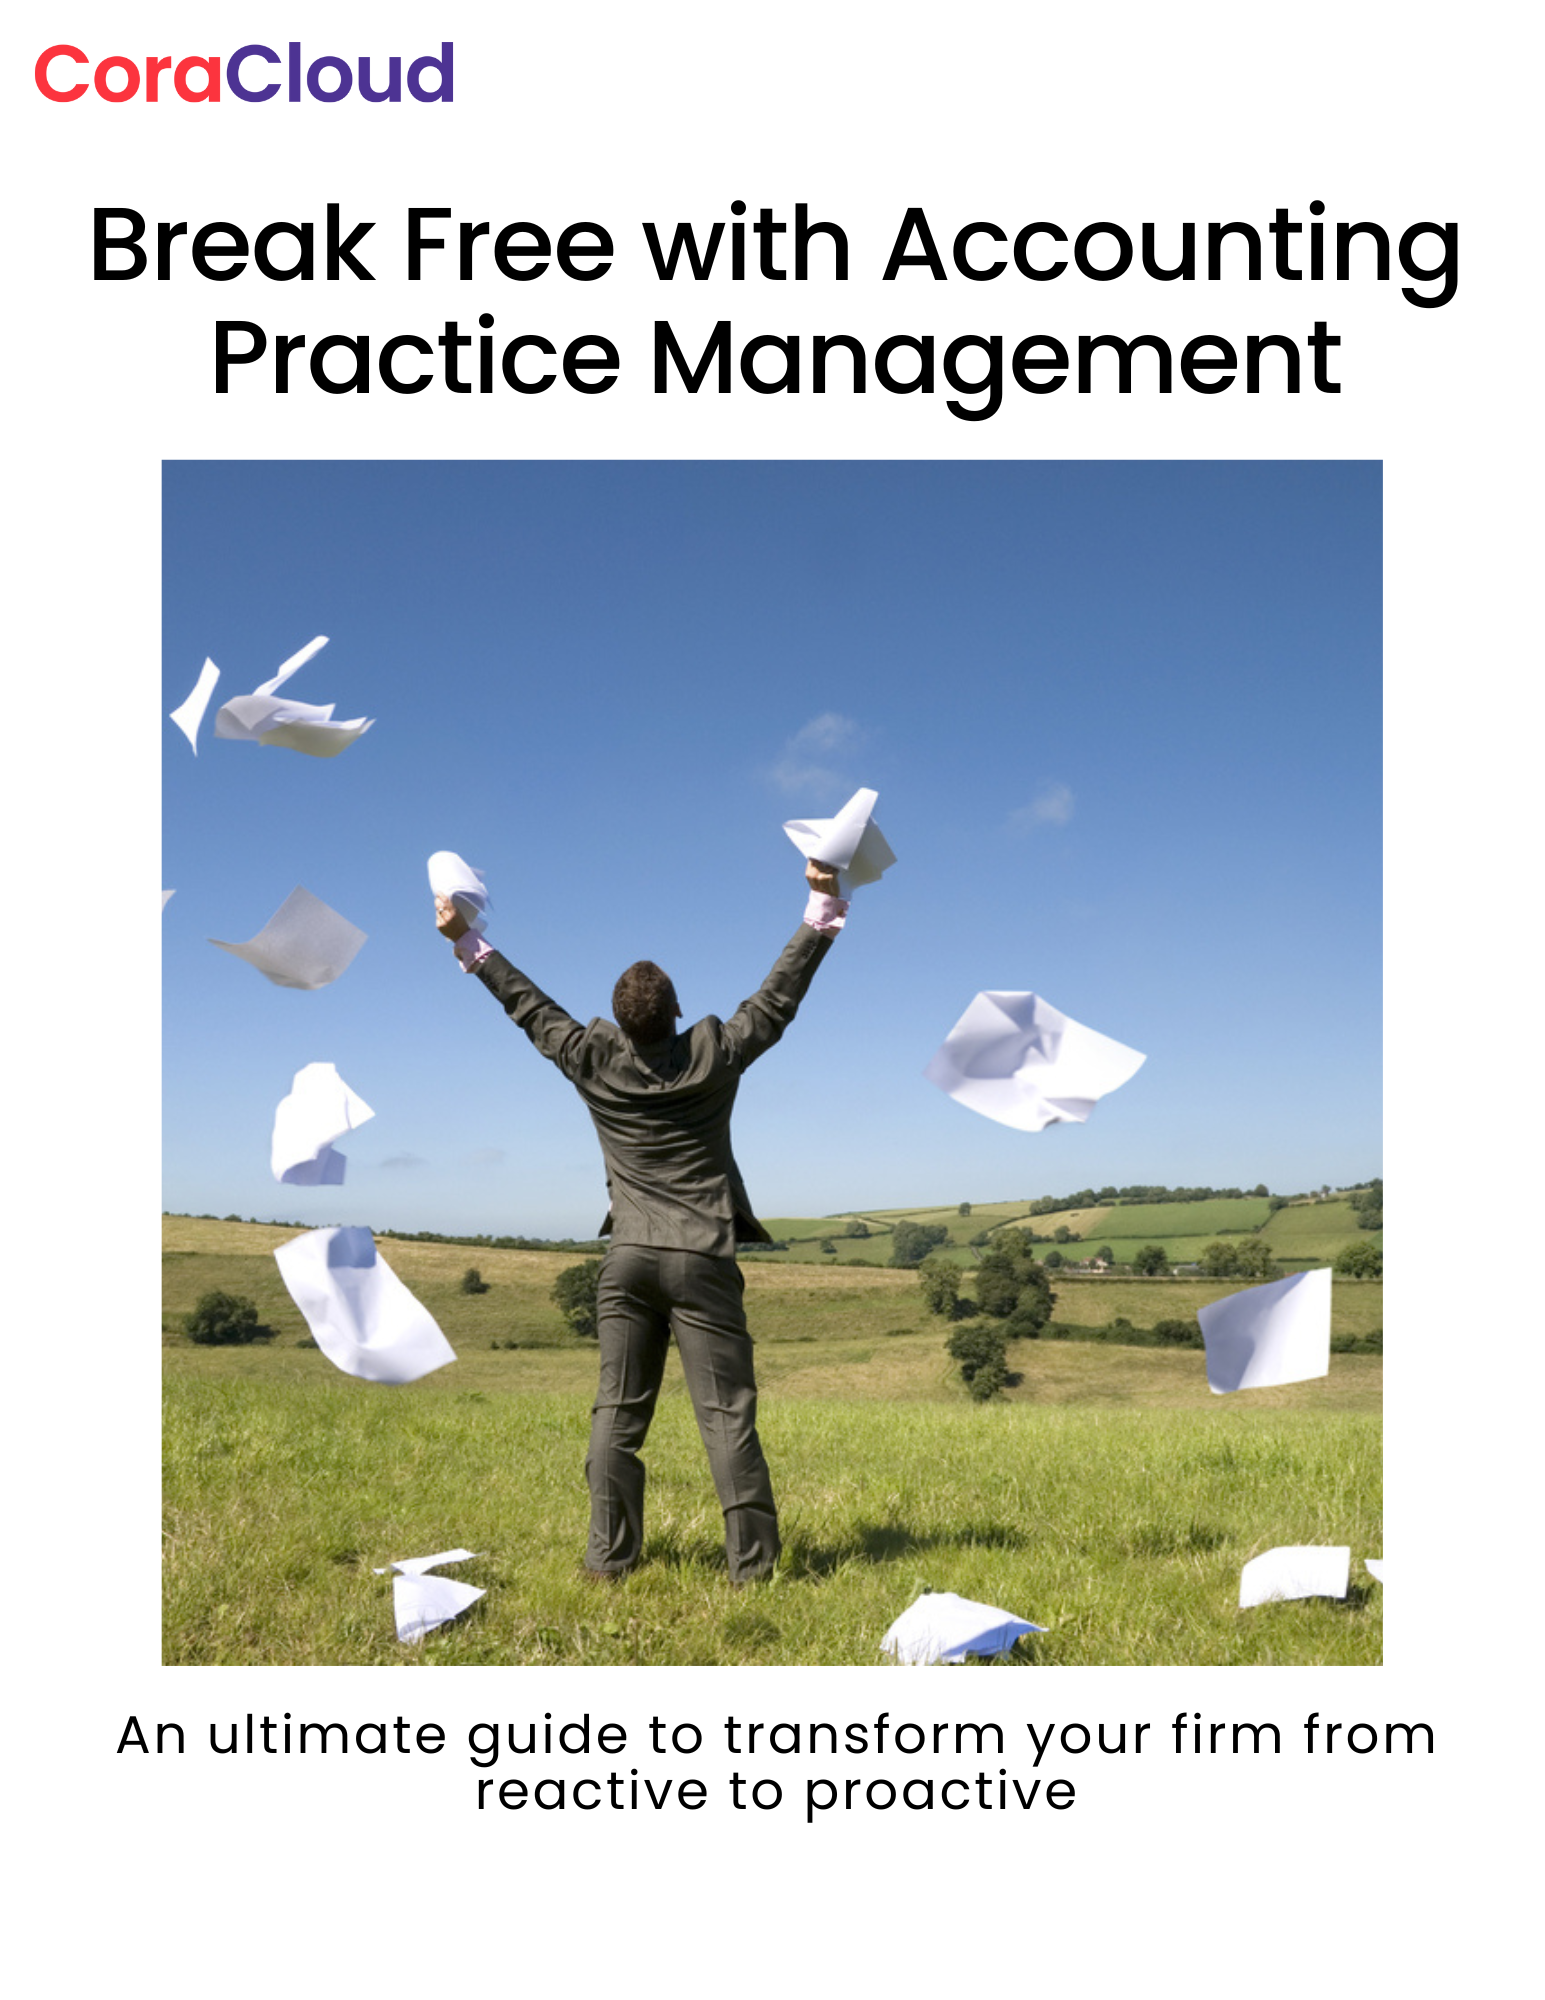 Break Free with Accounting Practice Management